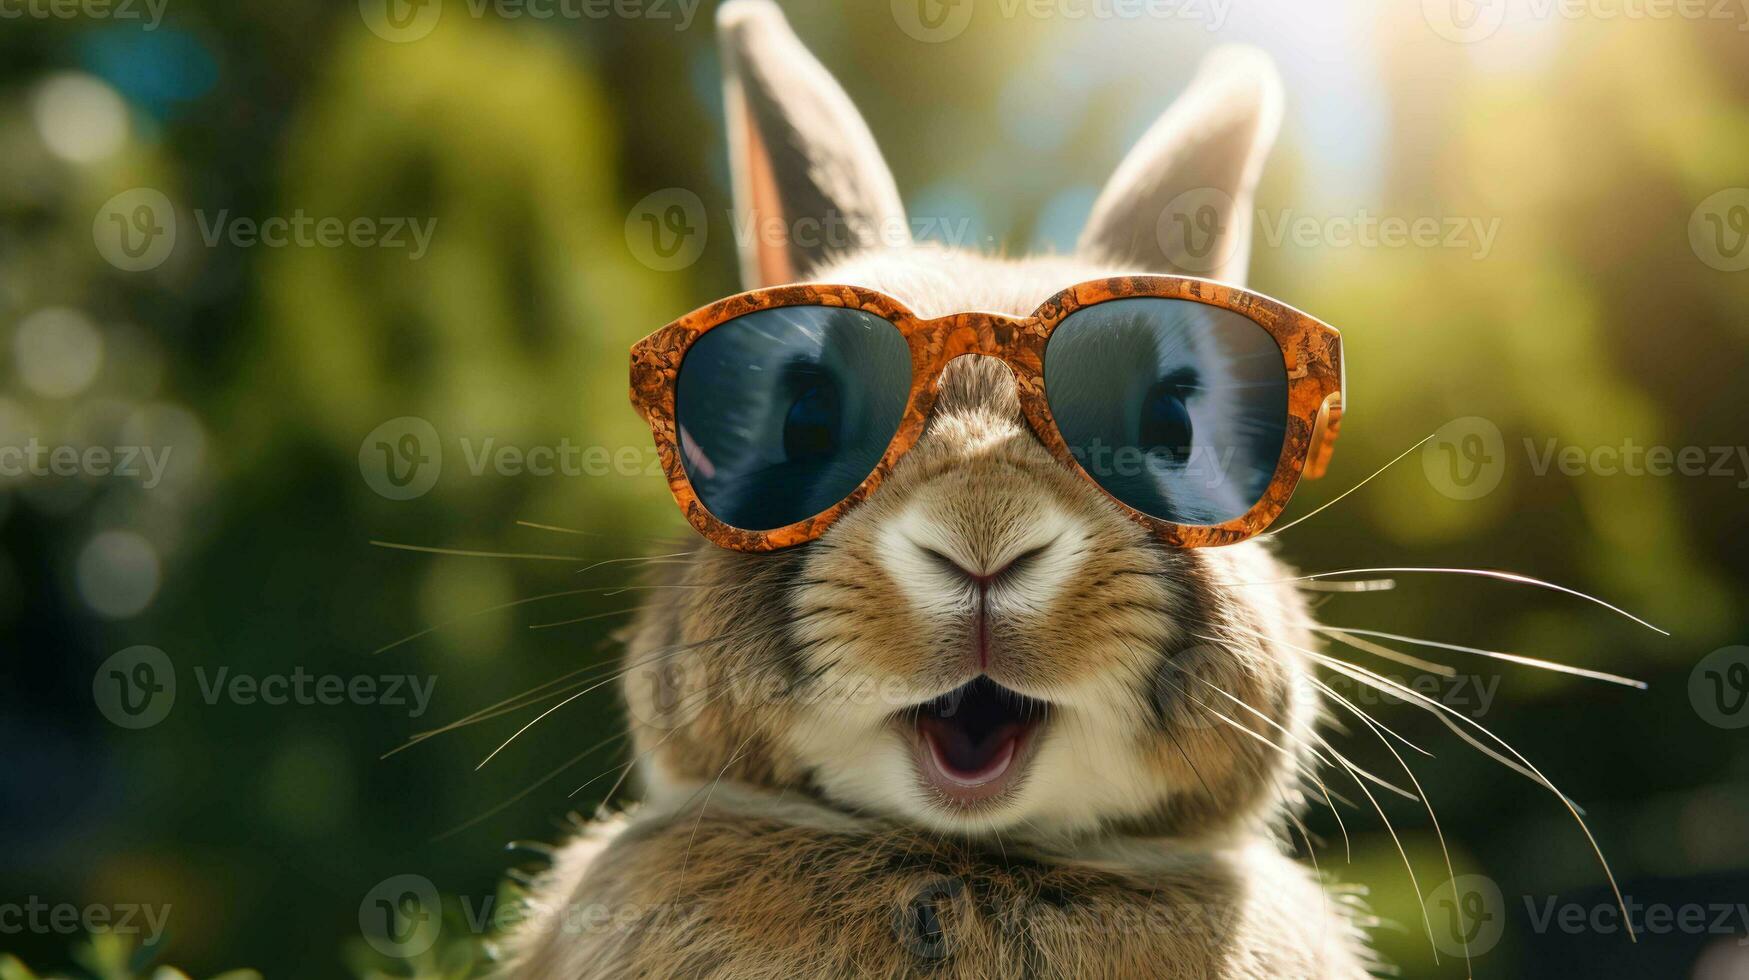 Stylish rabbit sporting shades, cool and confident photo